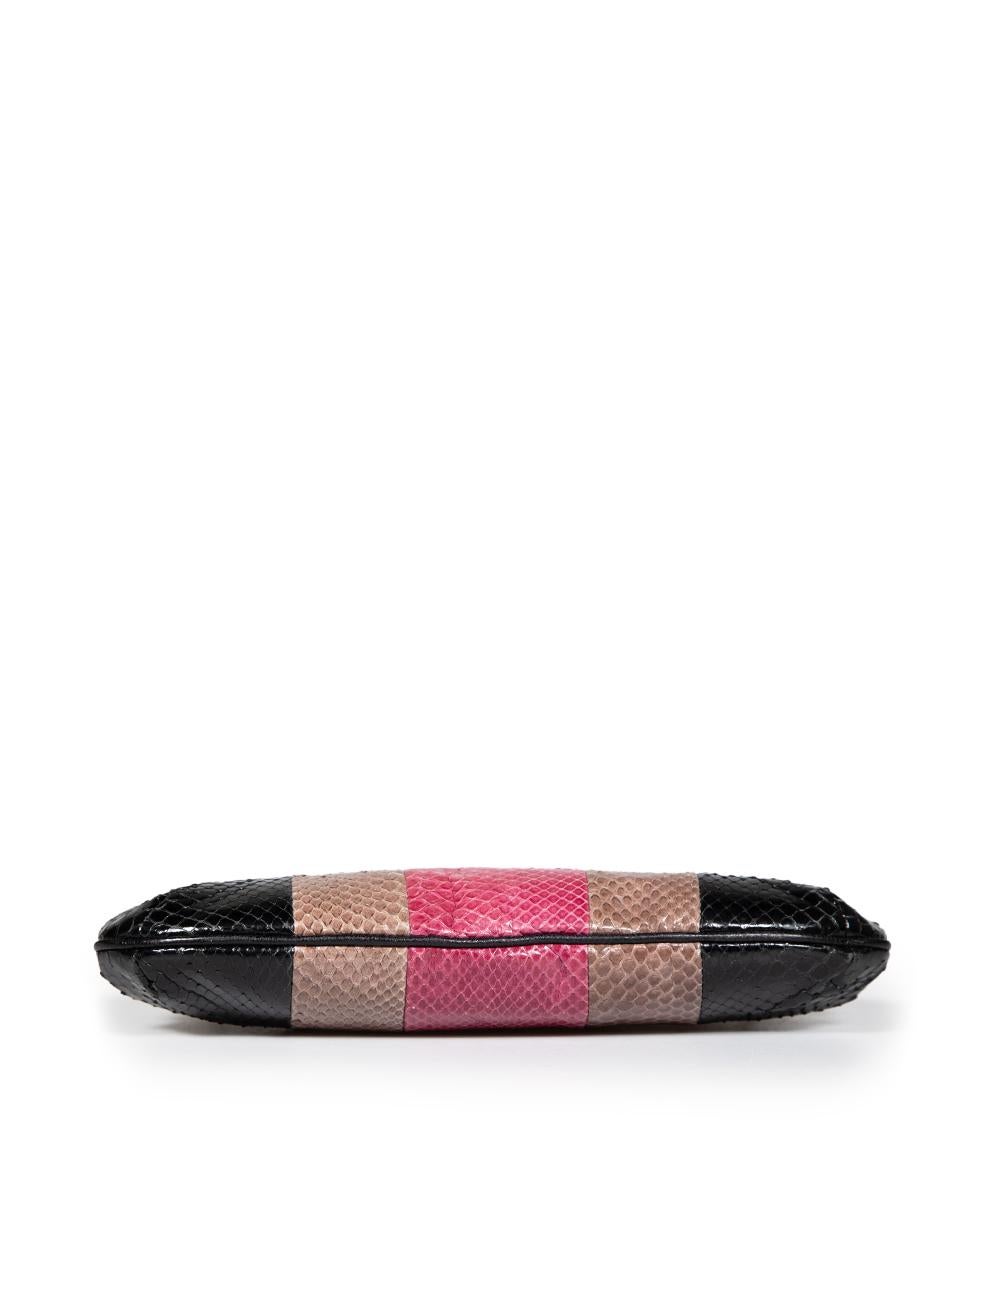 Women's Anya Hindmarch Striped Colourblock Snakeskin Clutch For Sale